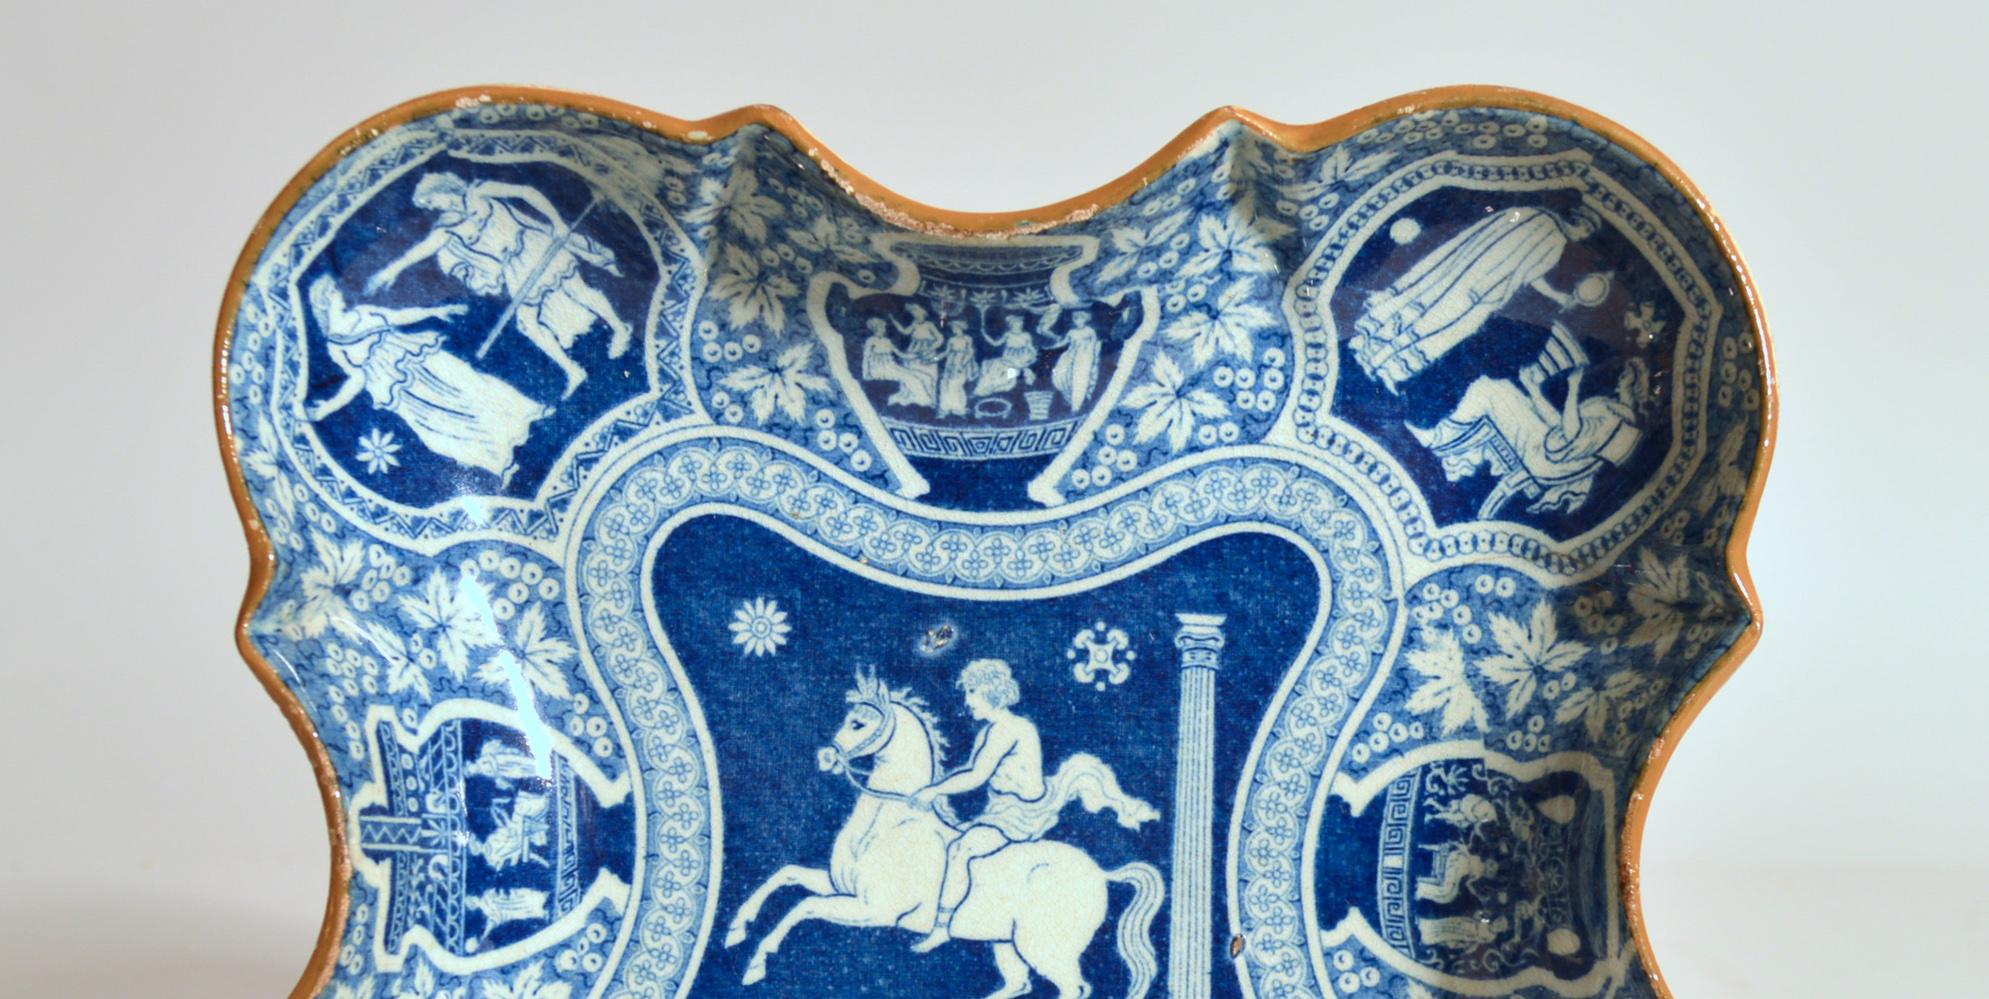 Spode Pottery neoclassical Greek Pattern Blue Dessert dish,
circa 1810

The Spode pearlware pottery-shaped dessert Greek Pattern dish has a central panel with a horseman on a rearing horse panels to the rim of urns and shaped panels with